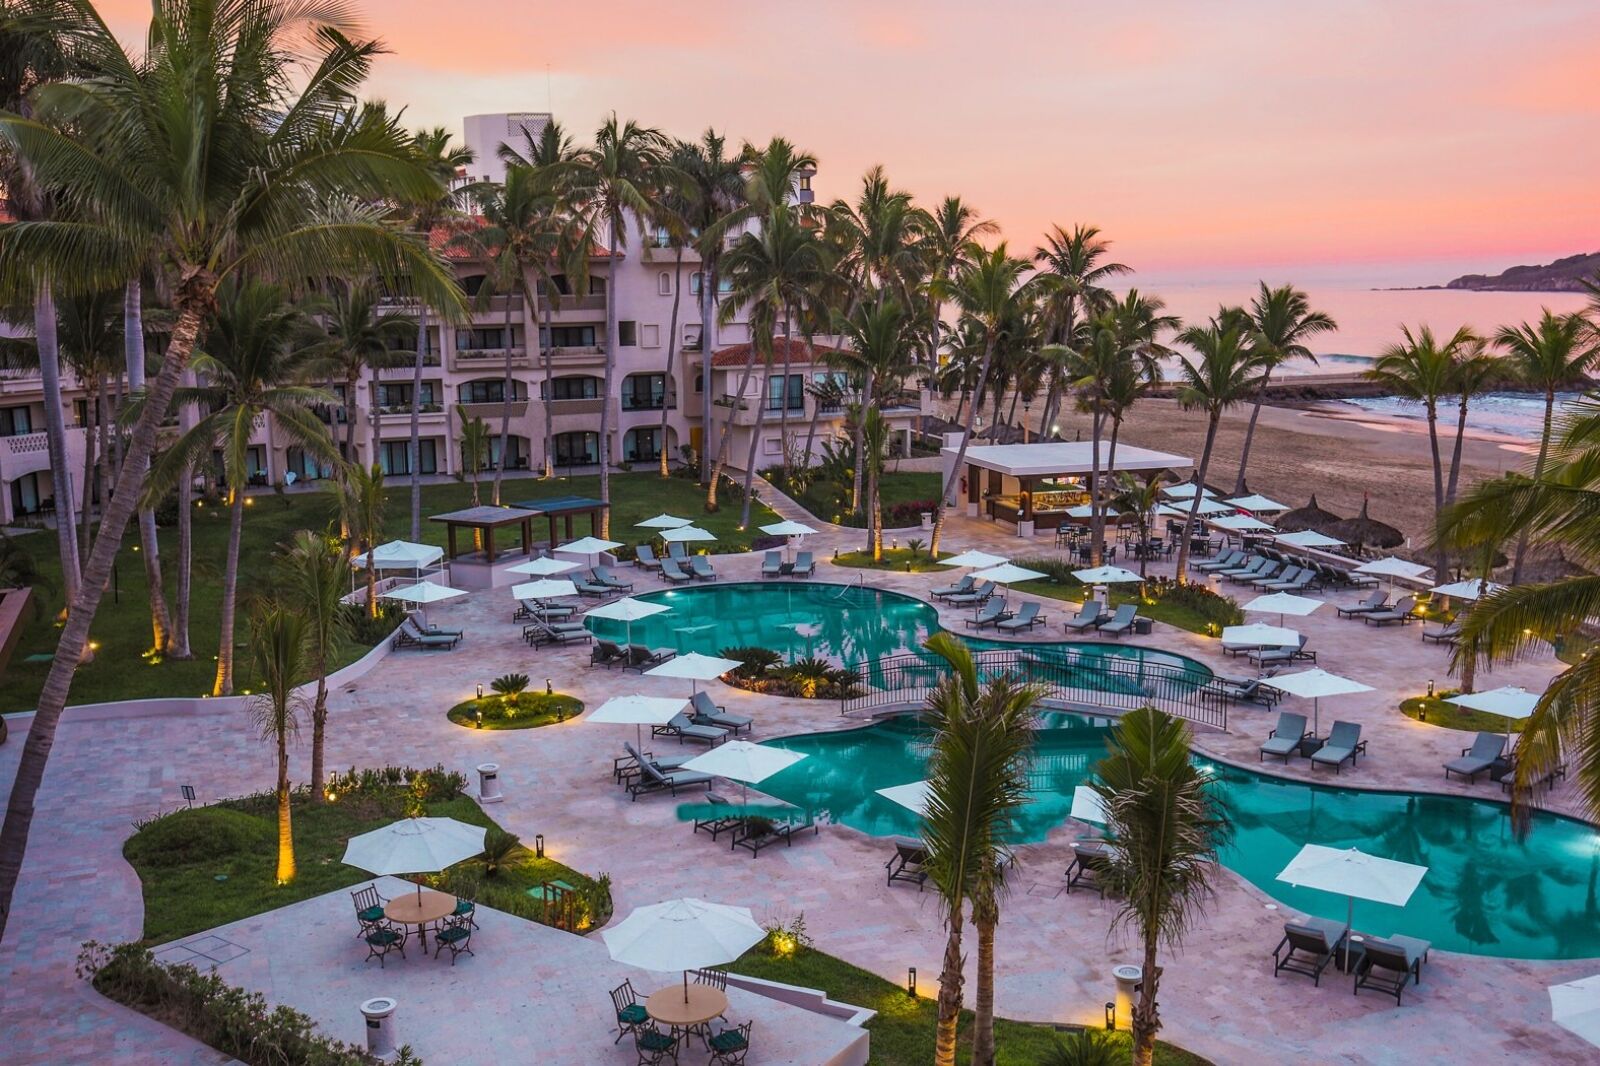 Pueblo Bonito Mazatlan Beach Resort at sunset one of the best places in mexico for couples 